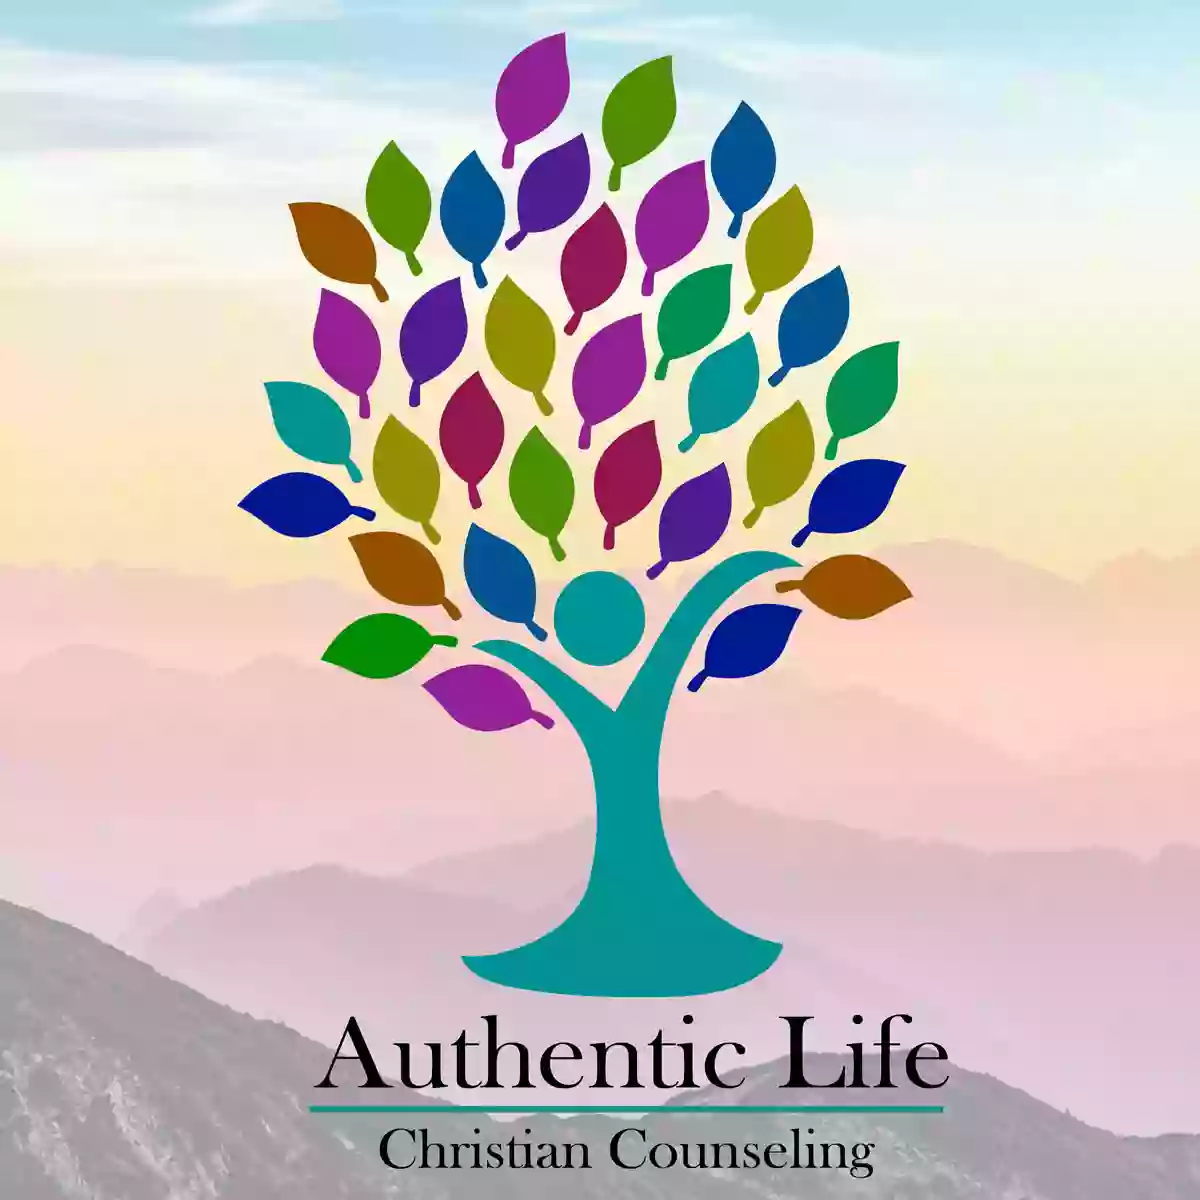 Authentic Life Christian Counseling